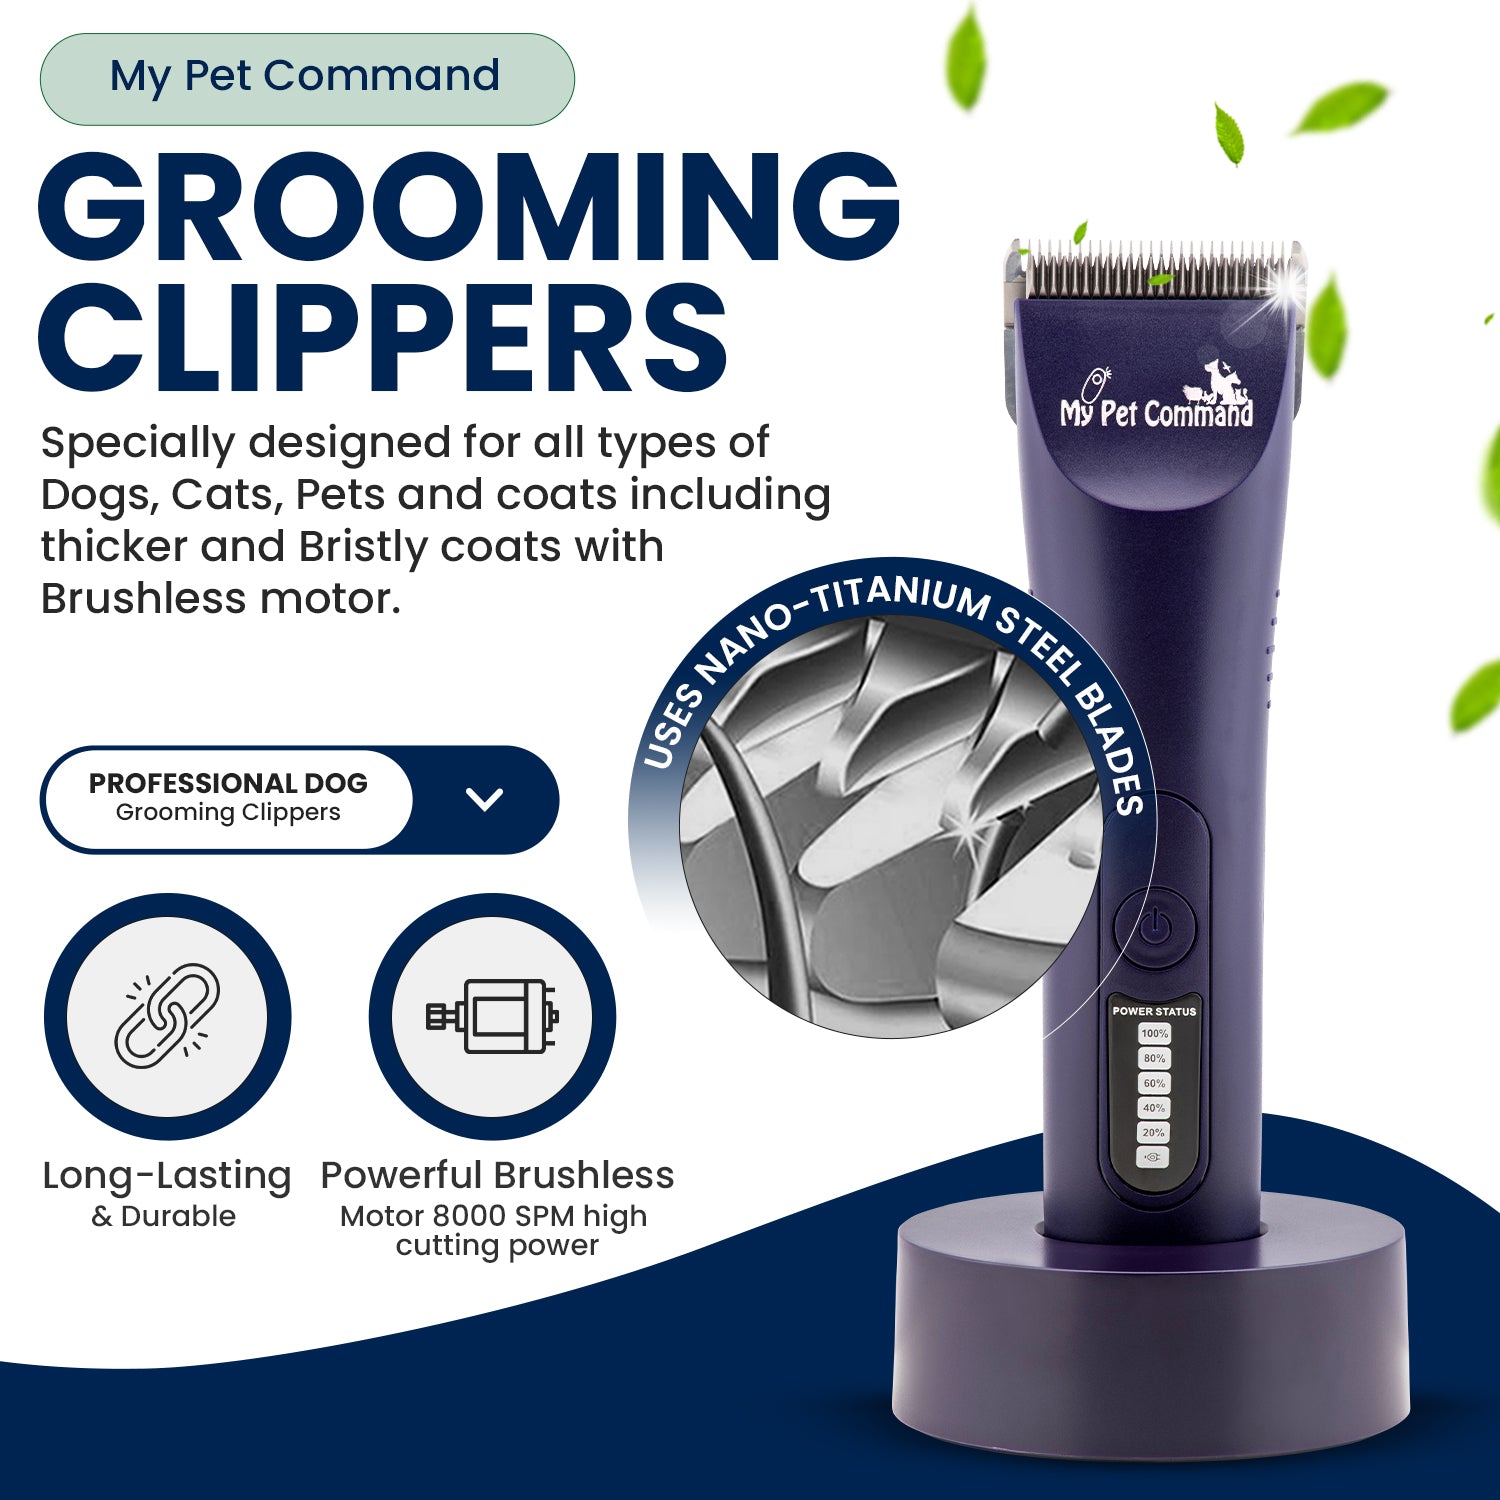 My Pet Command Professional Dog Grooming Clippers Kit for Dogs Pets Cats with Brushless Motor - My Pet Command